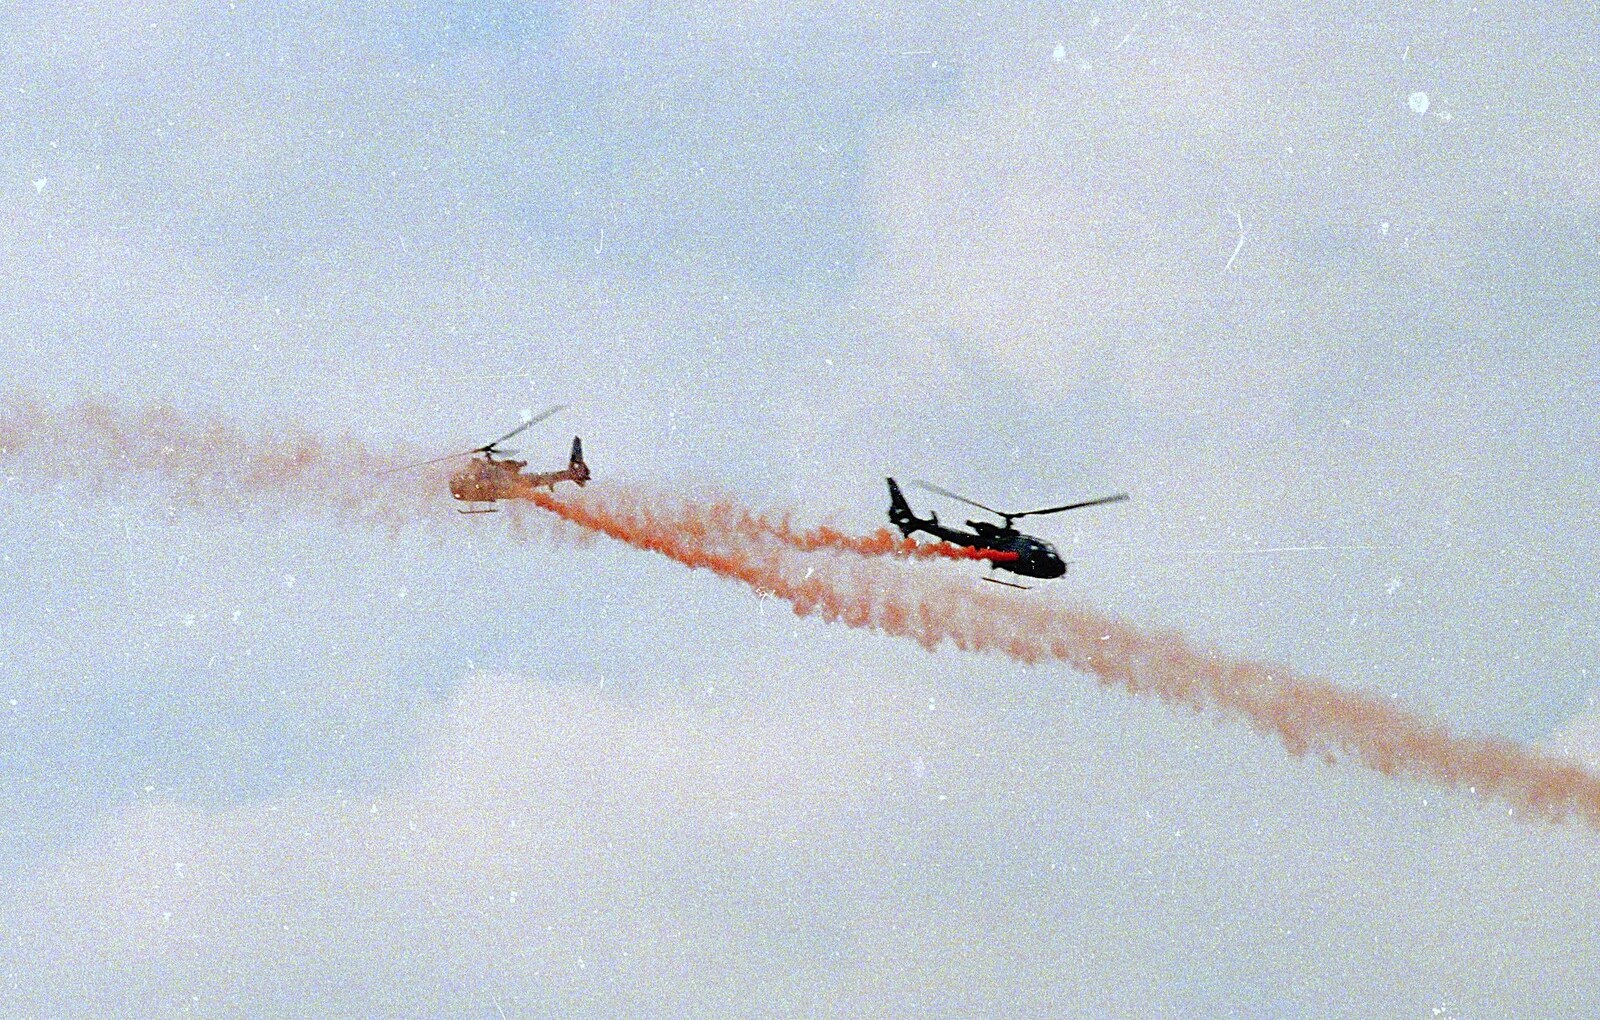 Helicopter aerobatics from The Mildenhall Air Fete, Mildenhall, Suffolk - 29th May 1994